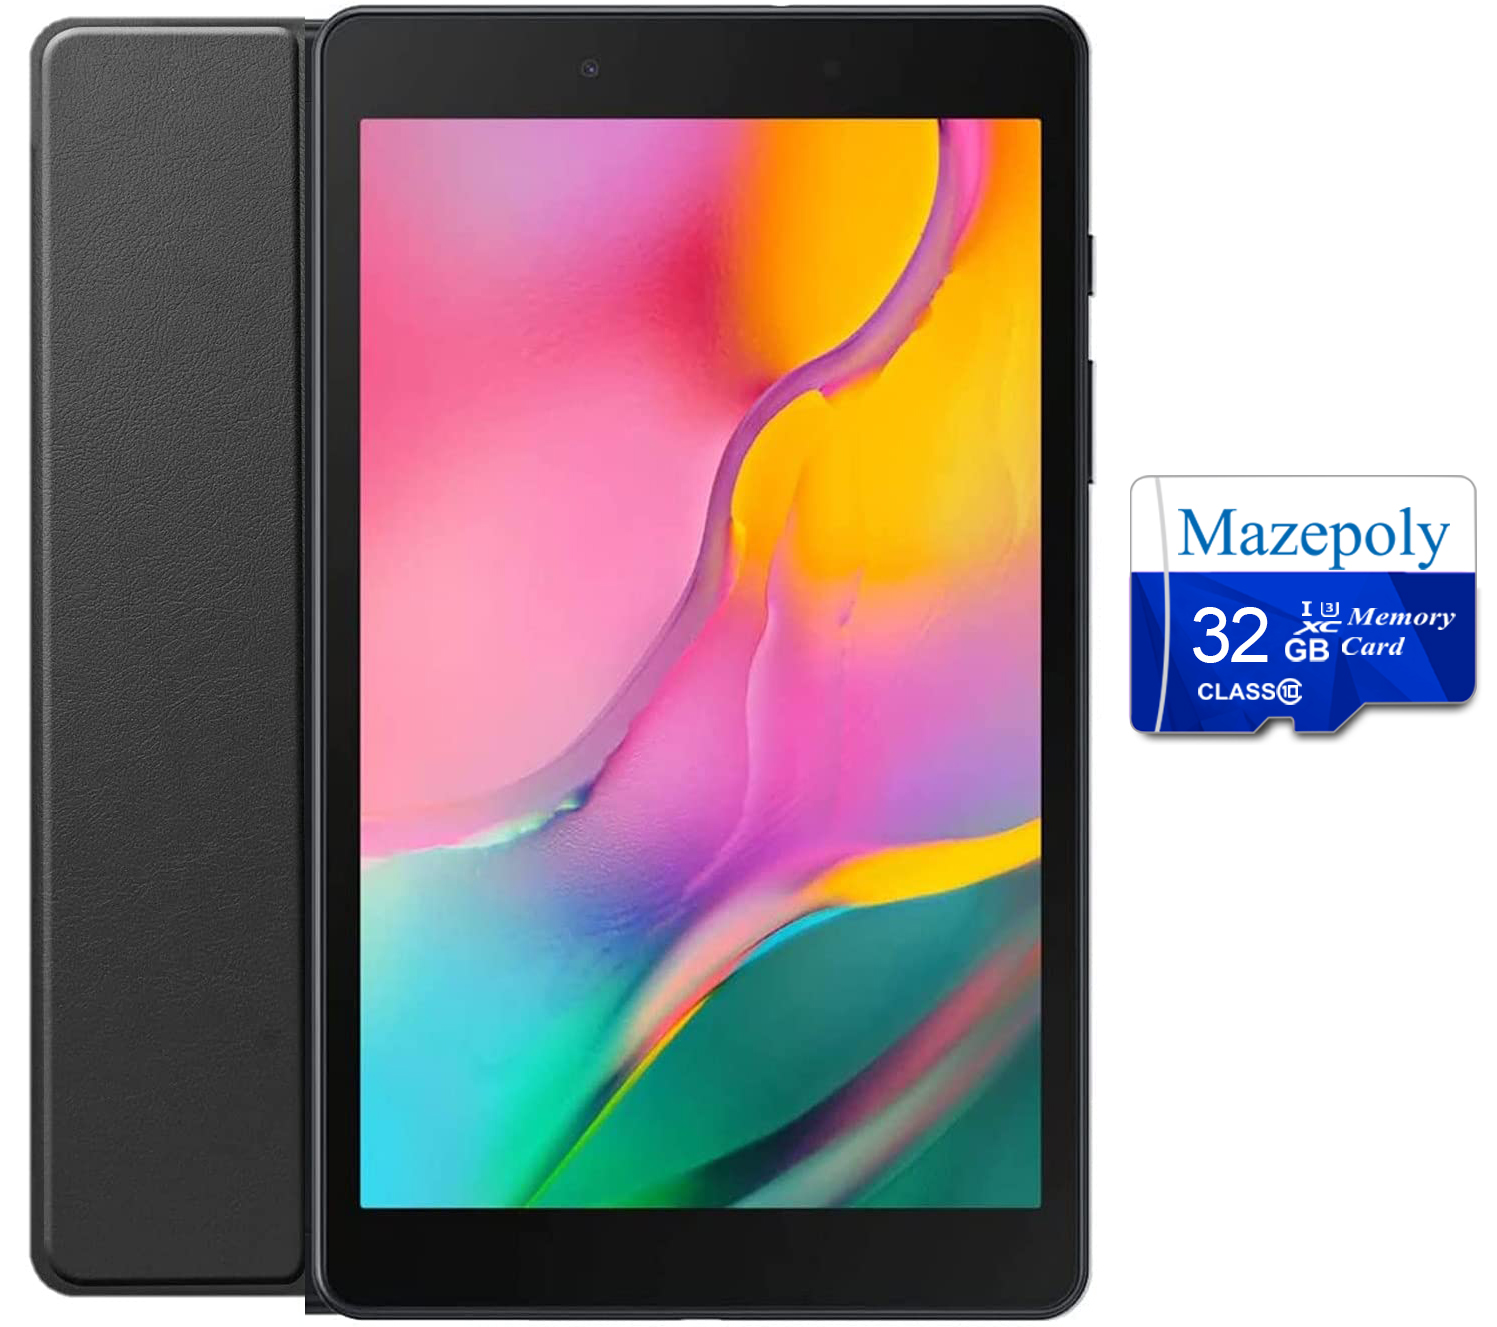 Samsung Galaxy Tab A 8.0-inch (2019 Version Newest) 32GB Touchscreen Tablet Bundle, Quad-Core Qualcomm Snapdragon Processor, 2GB RAM, Android 9.0 OS (LTE Unlocked, Black) with Mazepoly Accessories - image 1 of 7